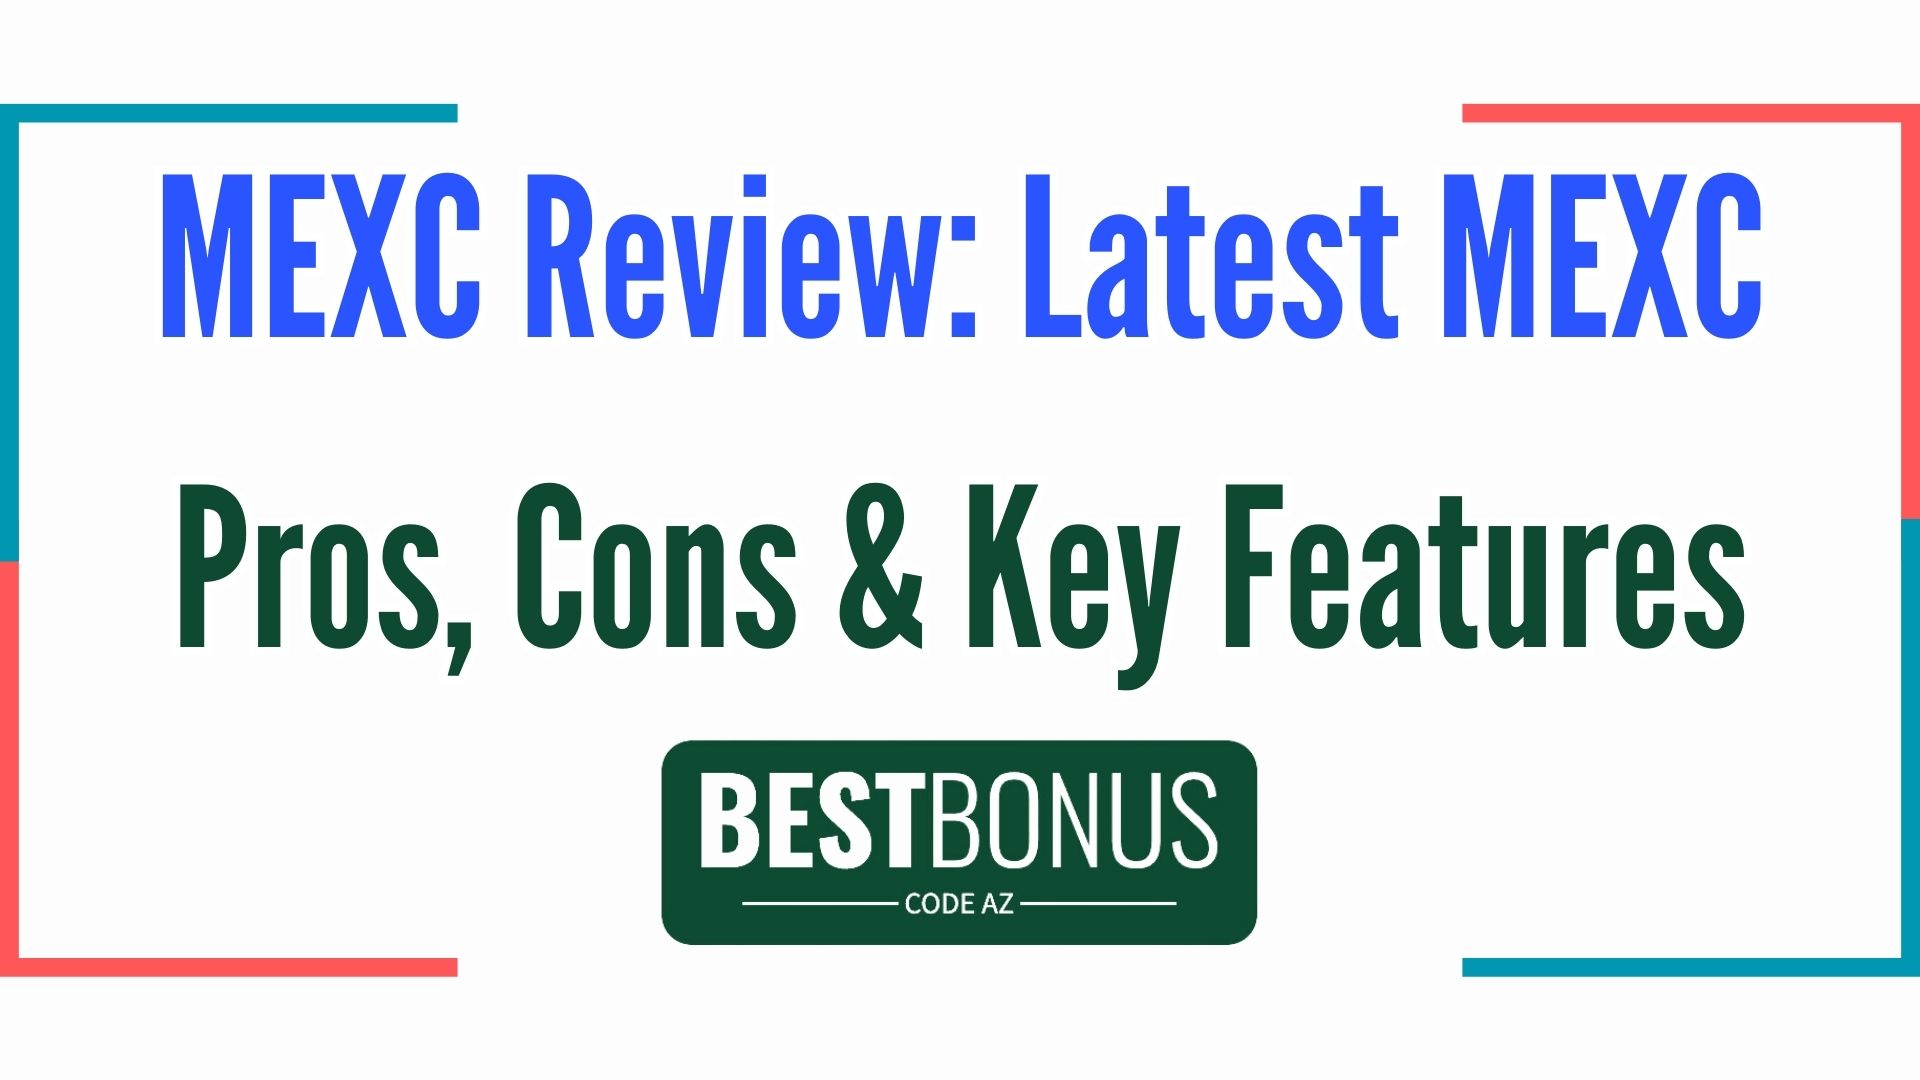 MEXC Review: Latest MEXC Pros, Cons, and Key Features